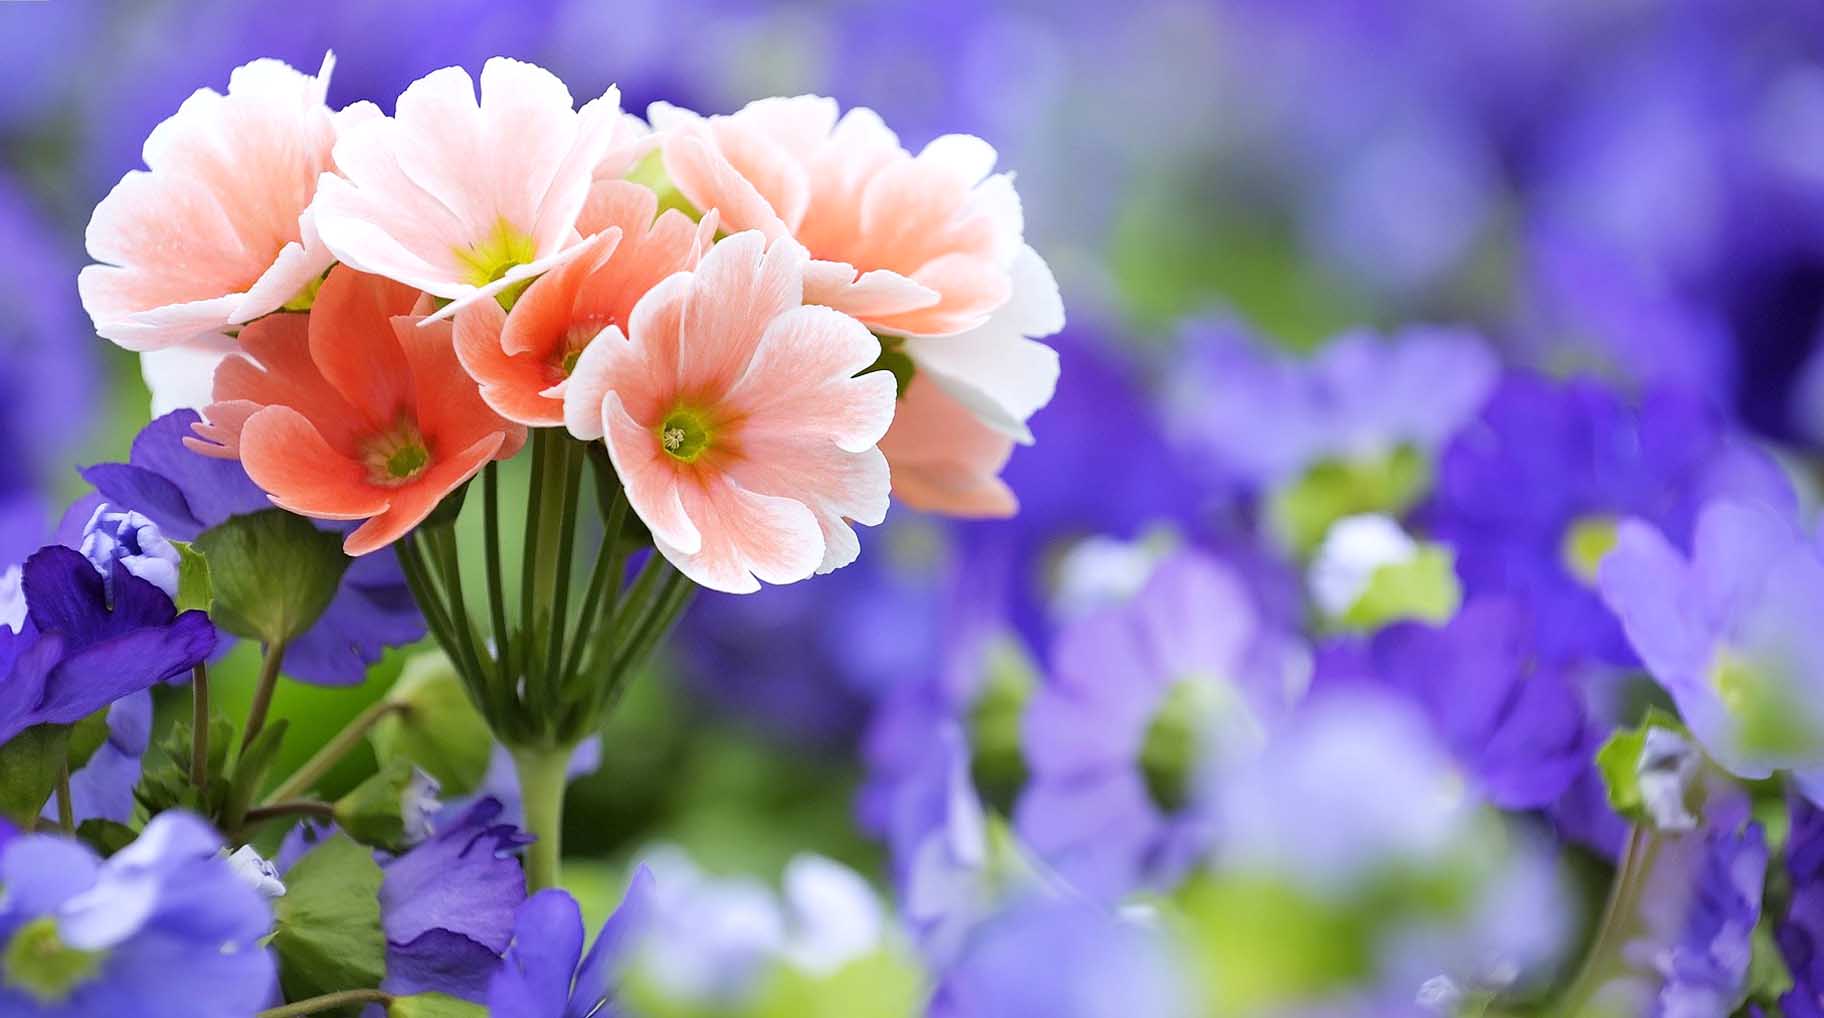 Free download of flowers wallpapers for desktop